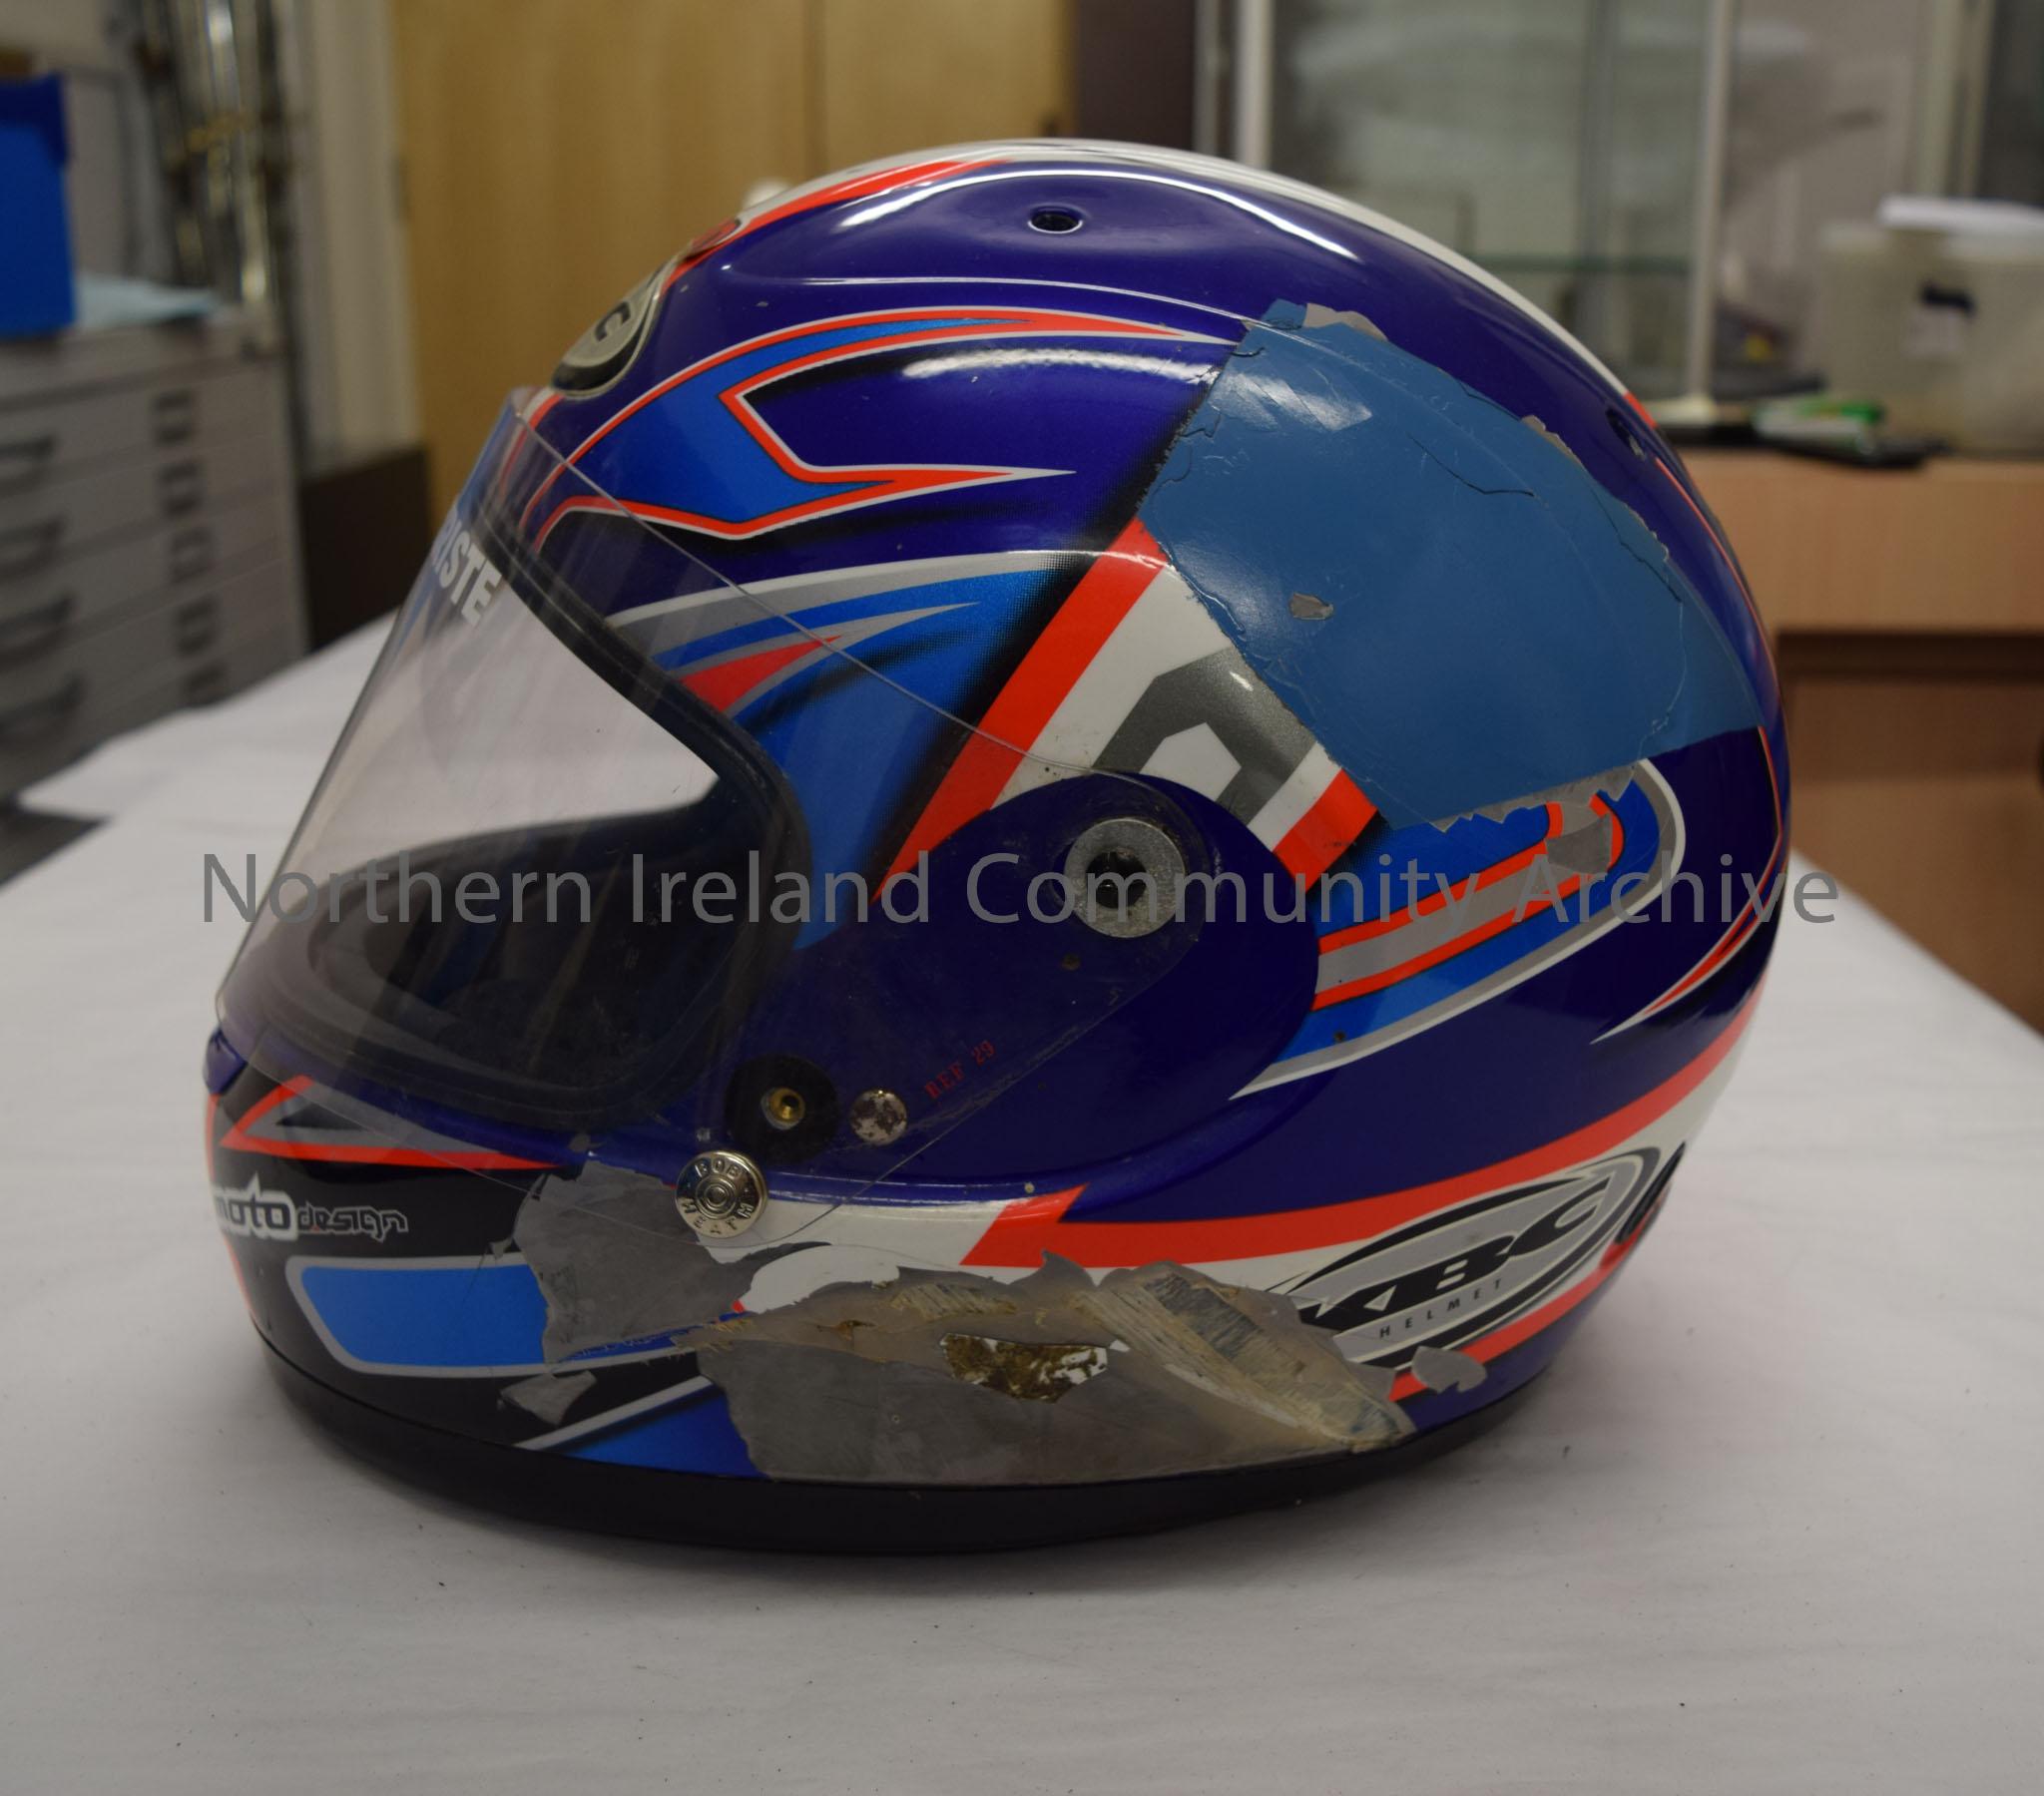 KBC motorcycle helmet belonging to James Christie. Dark blue helmet with white stripe down the middle and a blue, bright orange, white and silver patt… – 2016.92 (3)